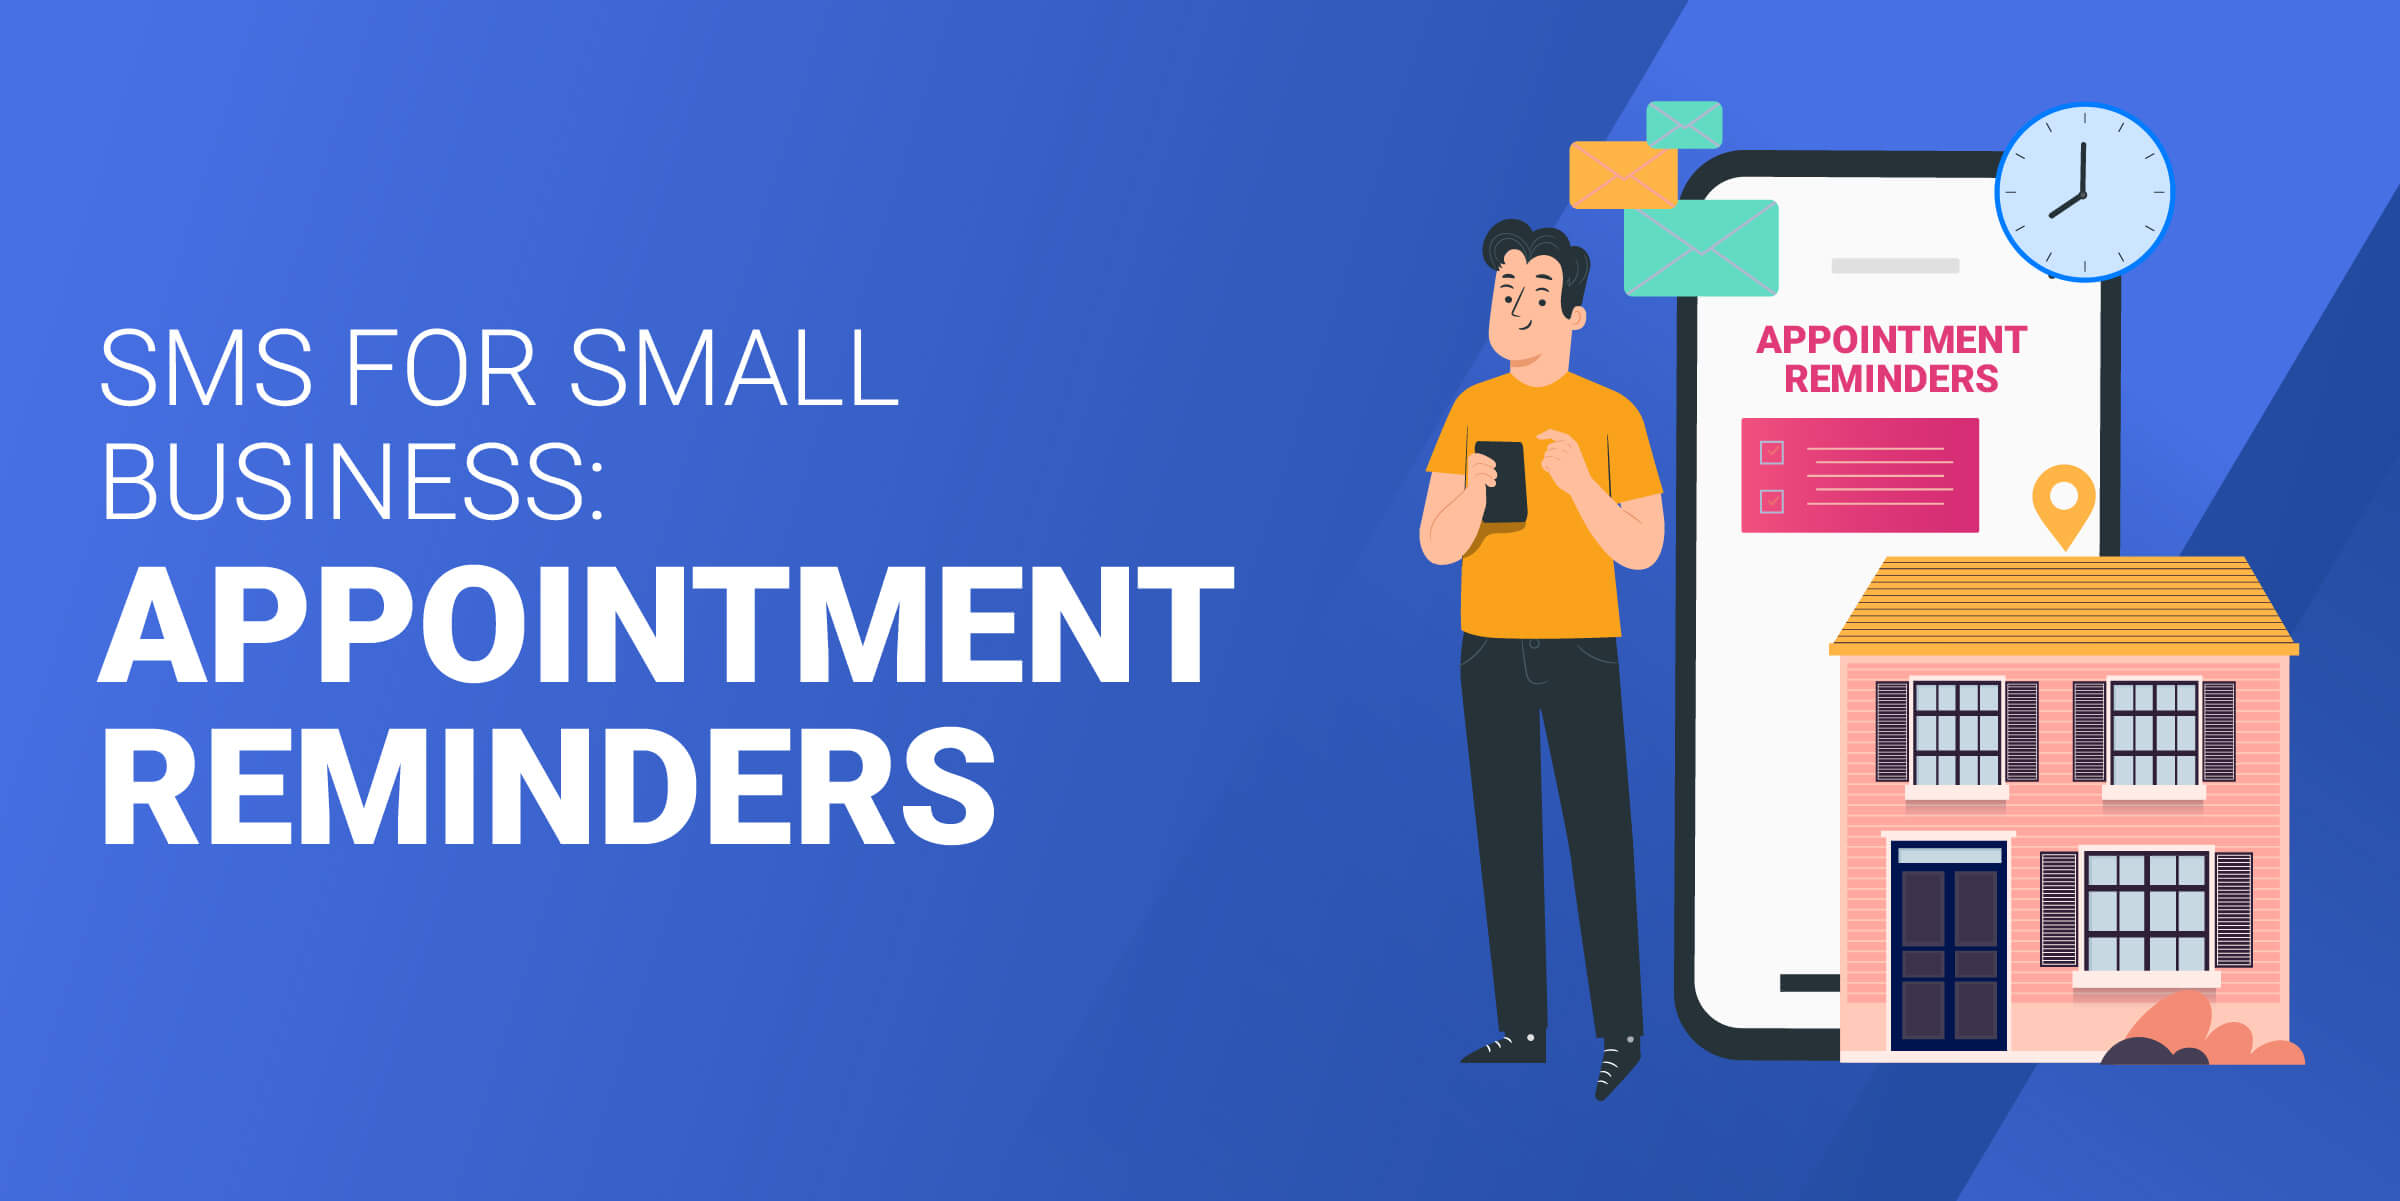 SMS for Small Business Appointment Reminders